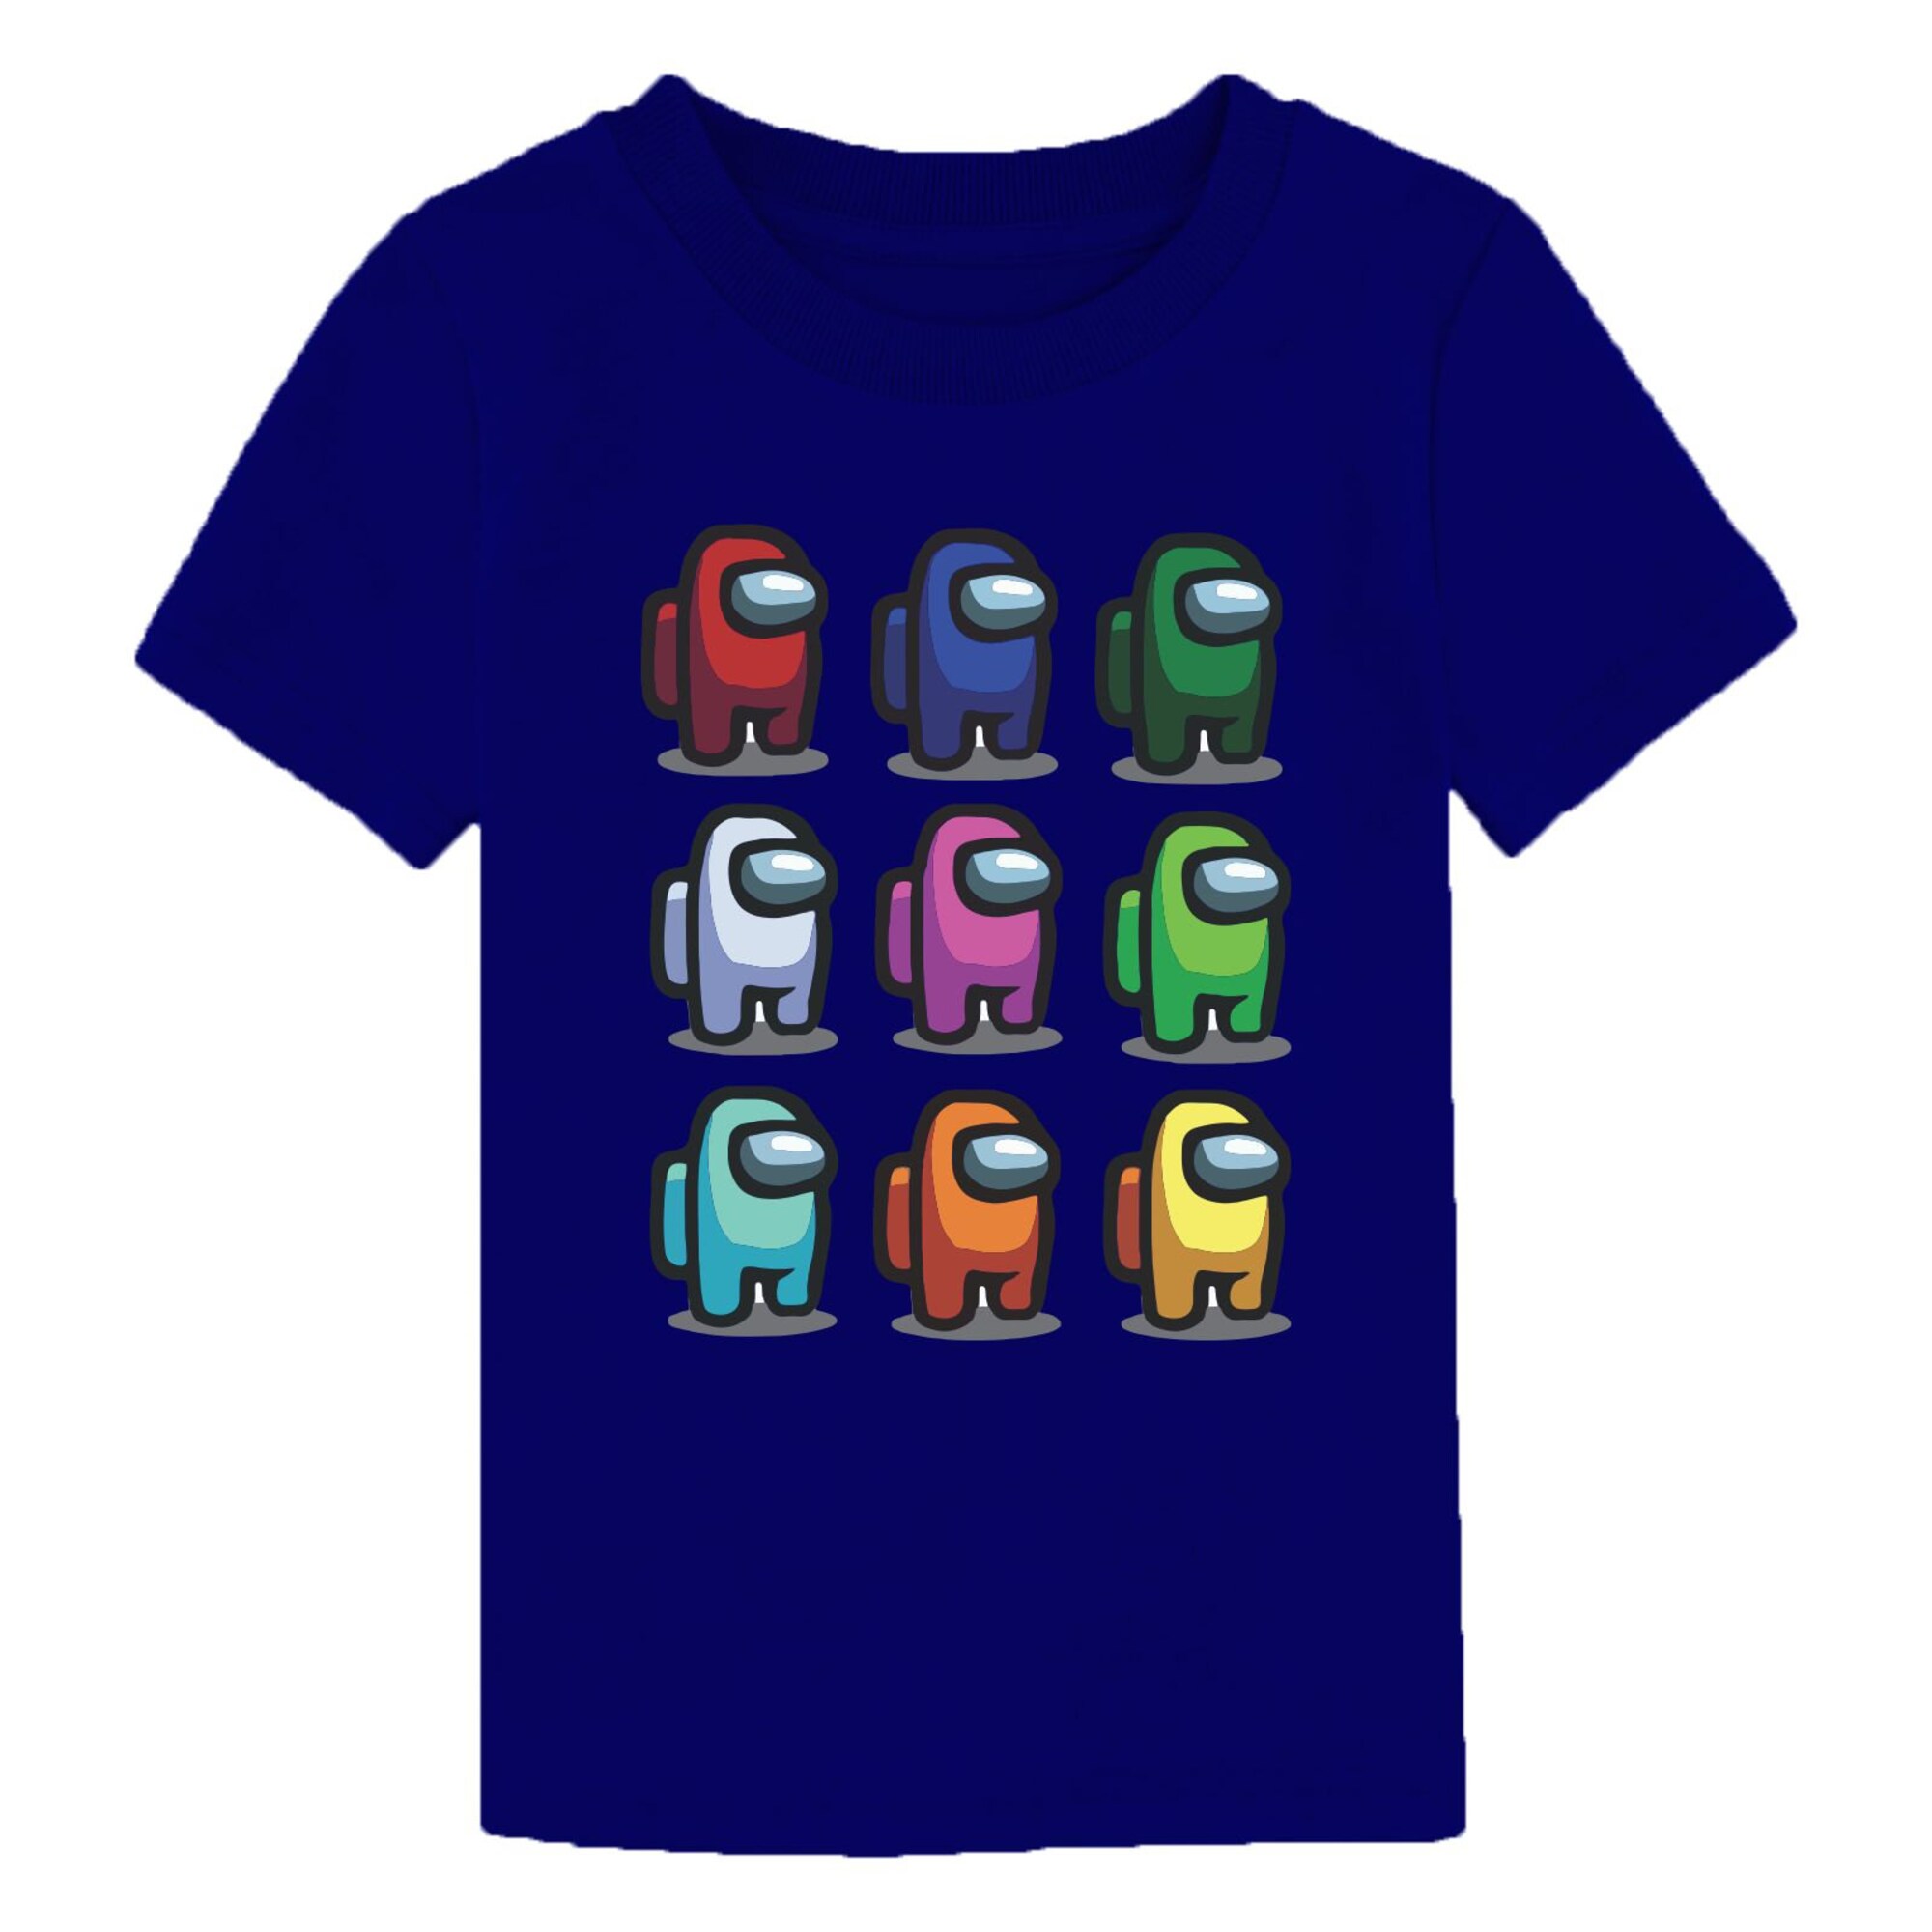 Discover Crewmate Gaming T Shirt Among Us Gamer Birthday Christmas Party Boys Girls Kids Top Gift